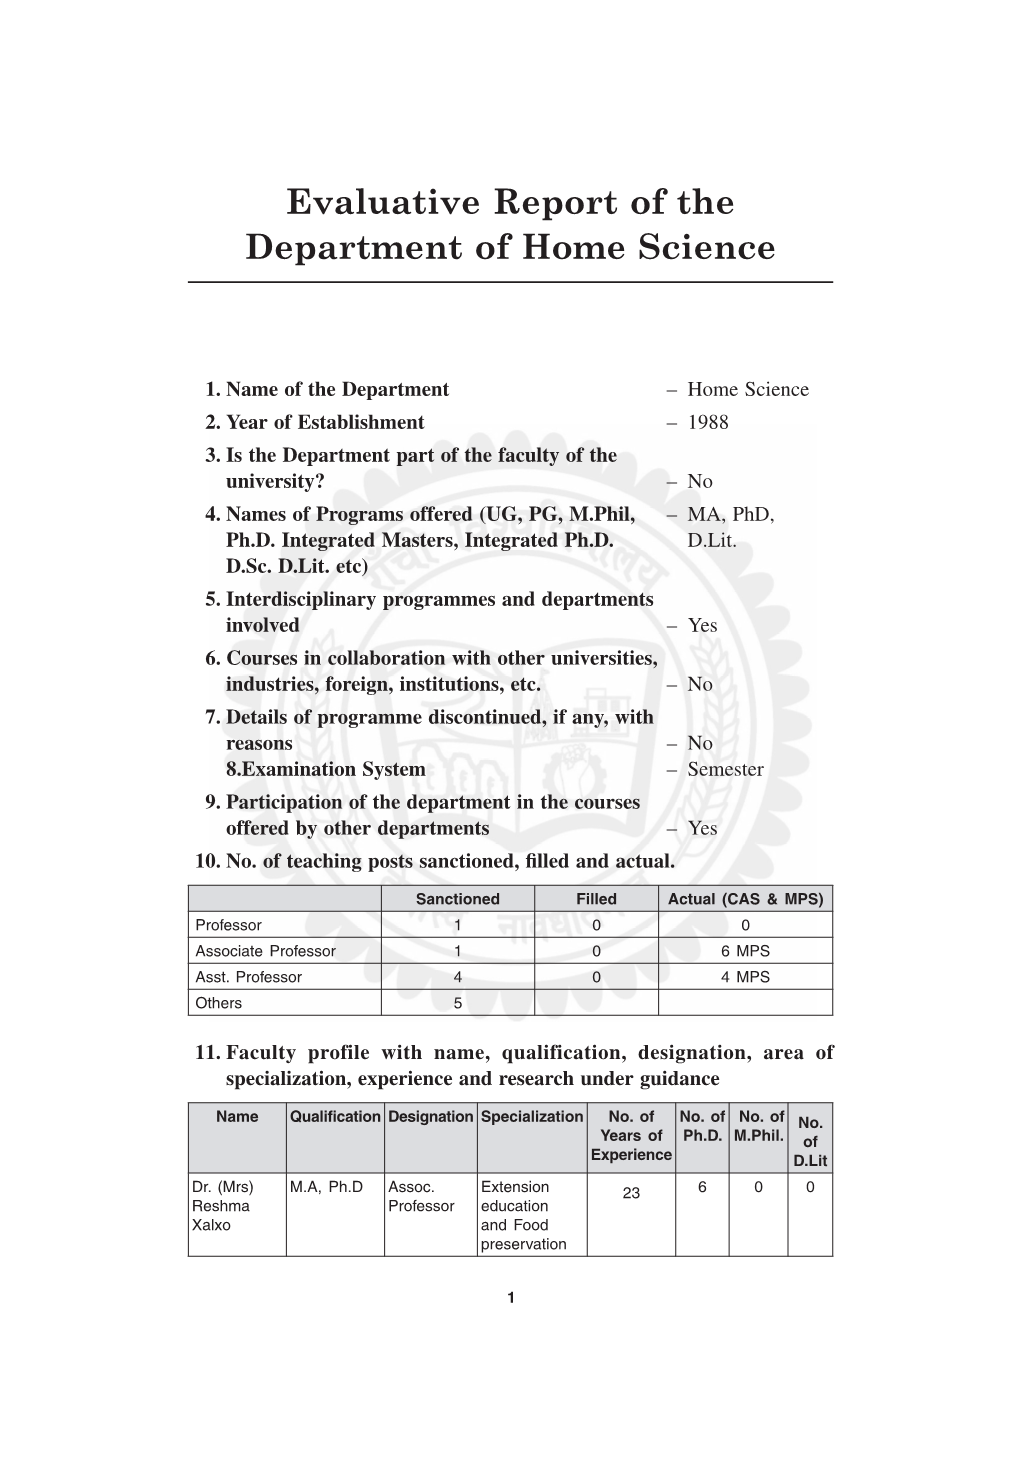 Evaluative Report of the Department of Home Science